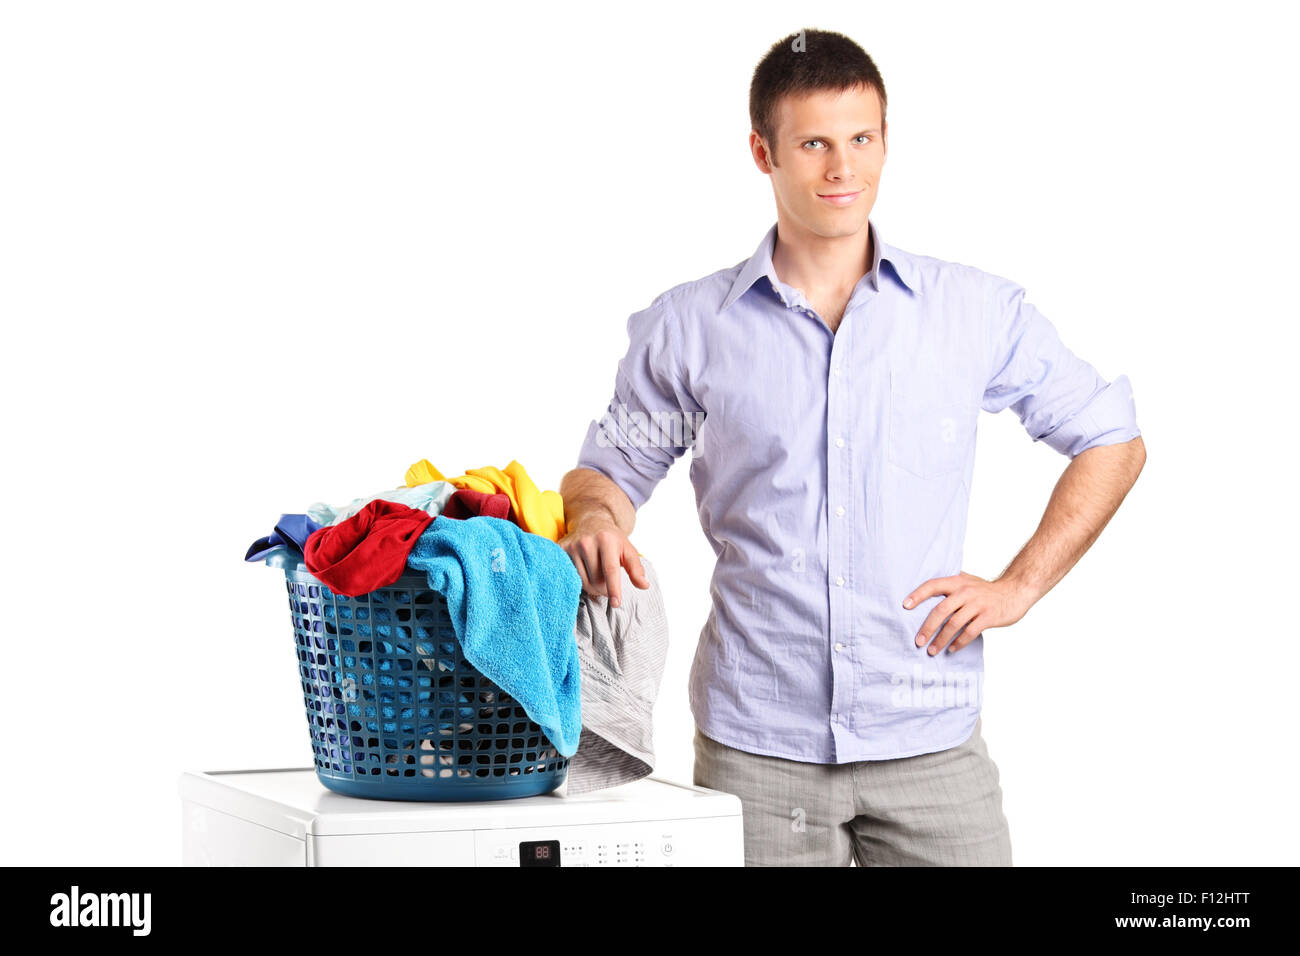 Guy standing by a washing machine with a laundry basket on it isolated on white background Stock Photo